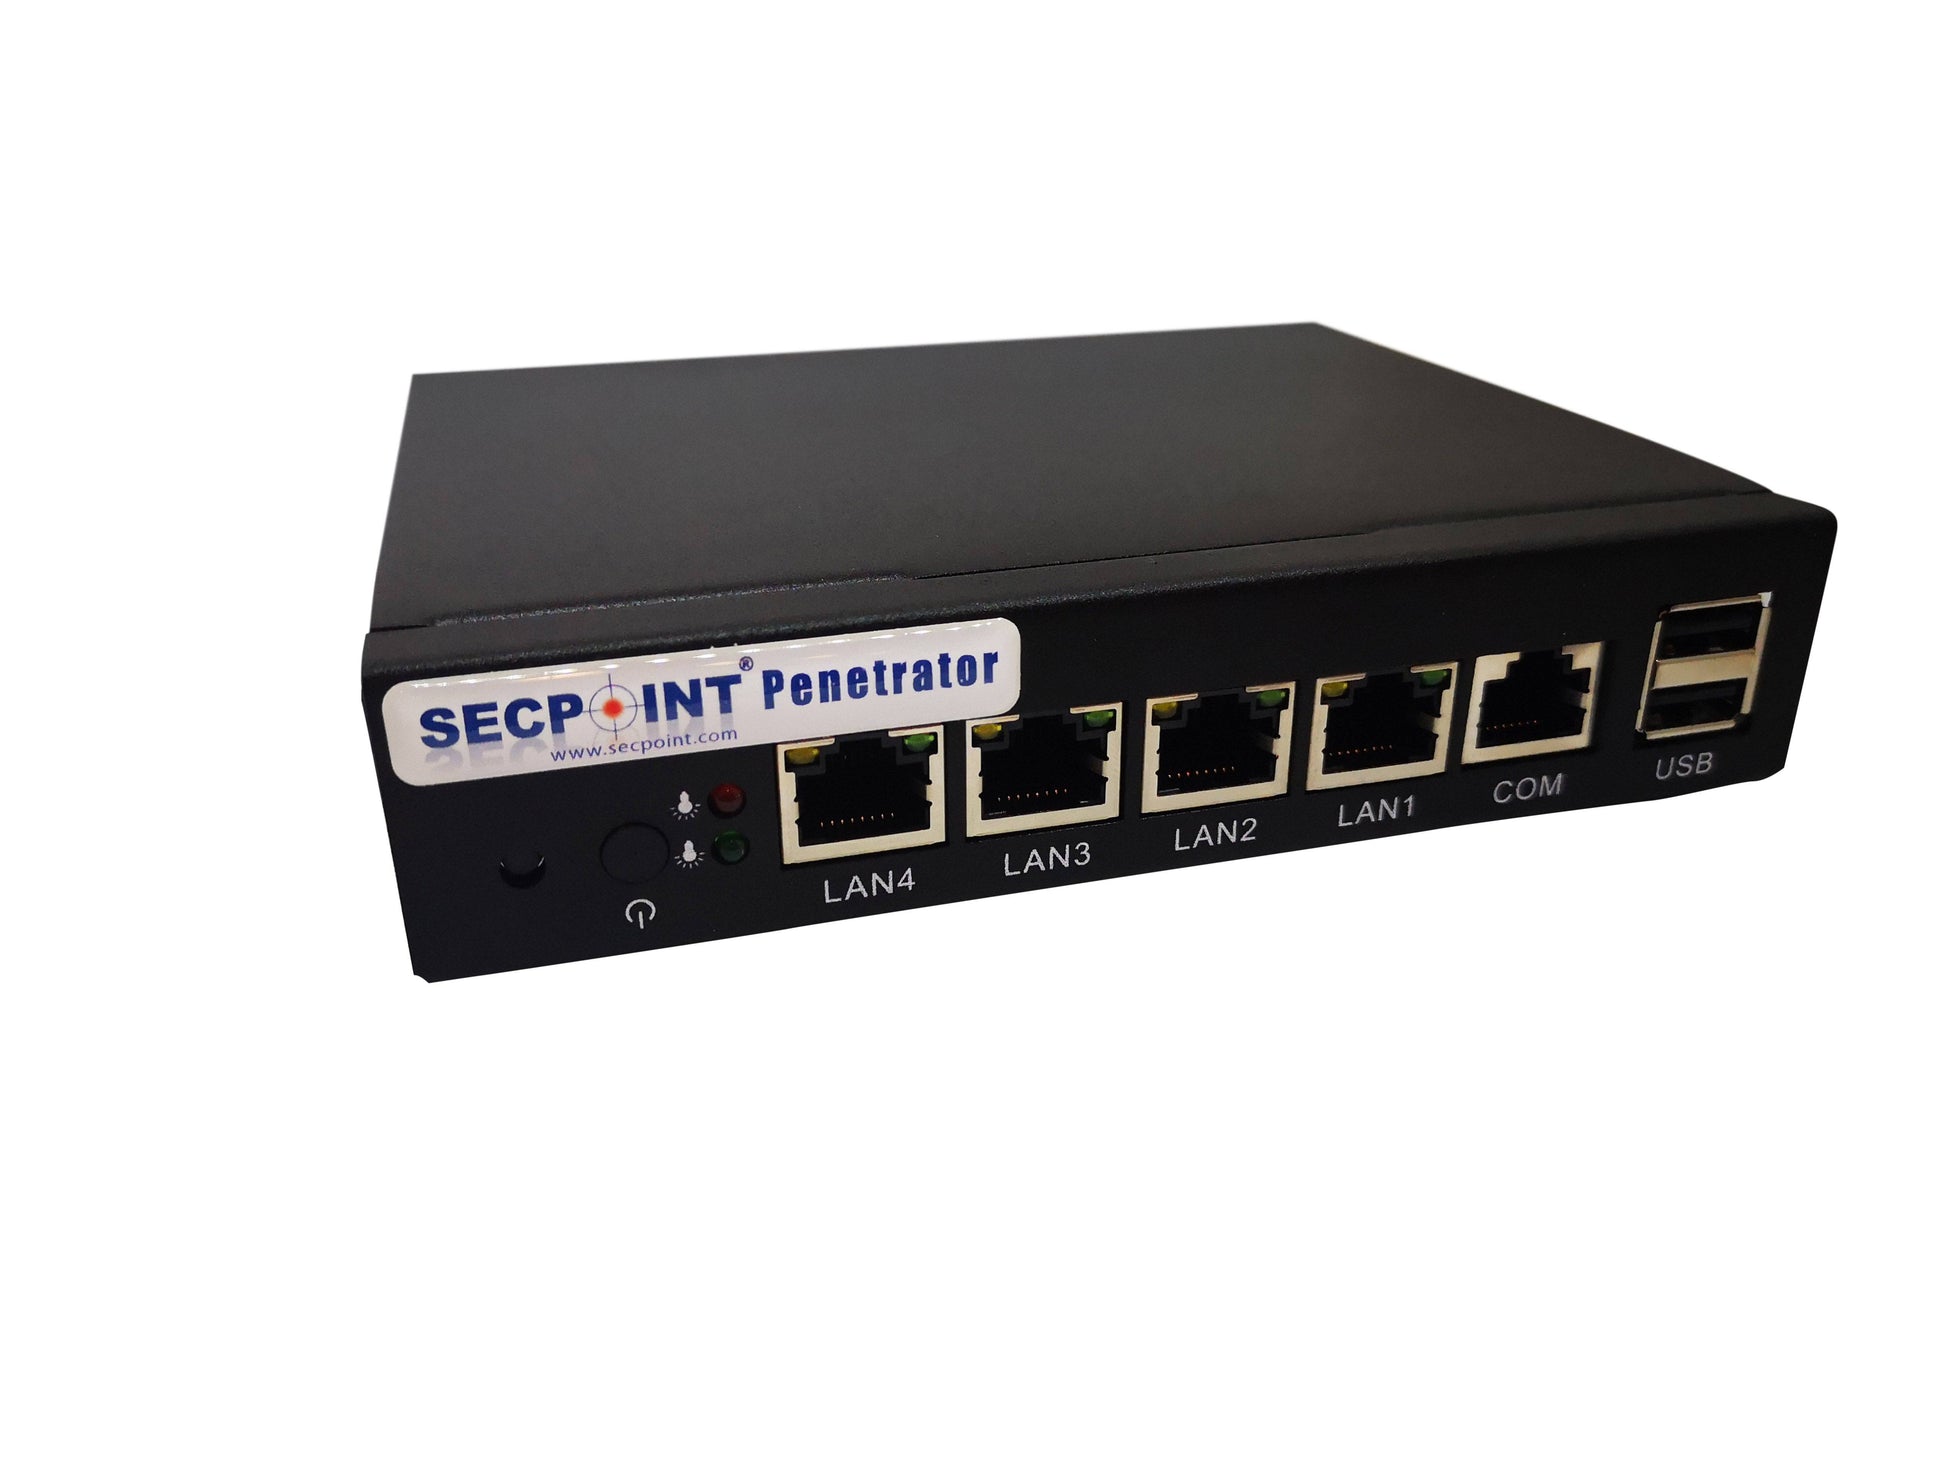 SecPoint Penetrator S9 - 16 IP Concurrent Scan License Vuln Scanning Appliance SFF (3 Years License) - SecPoint